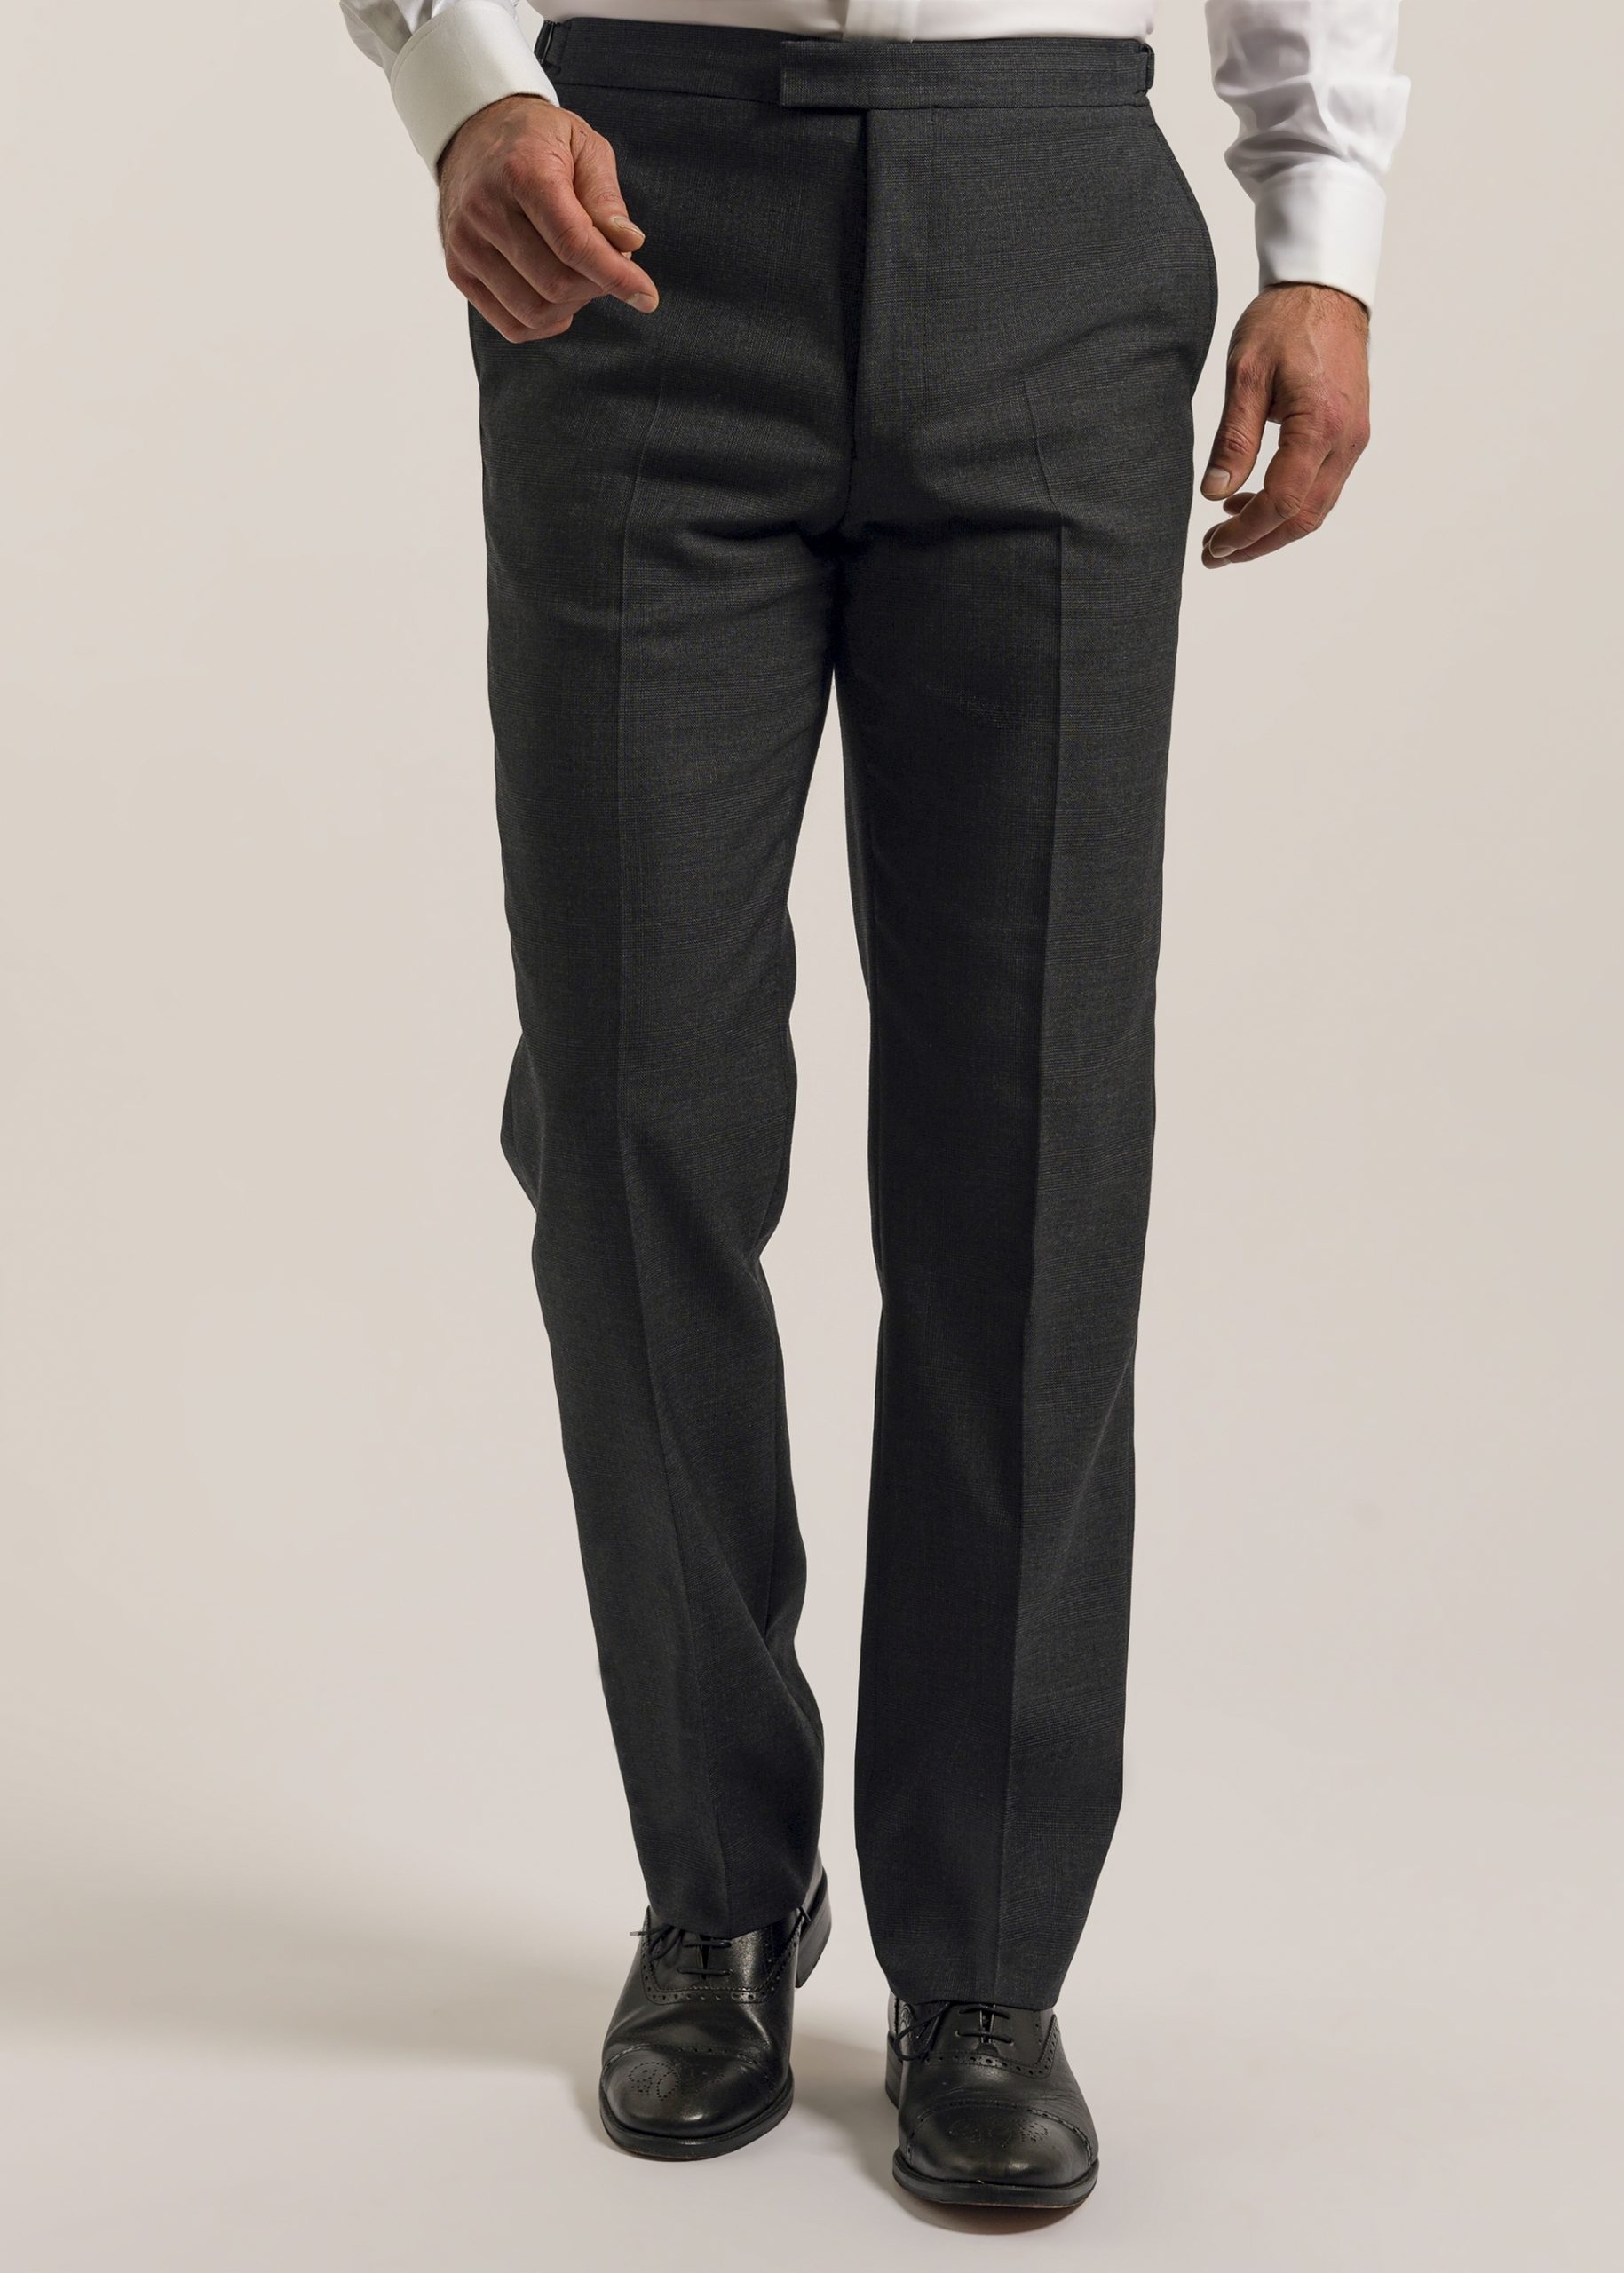 Front of men’s formal suit trousers in grey glen check